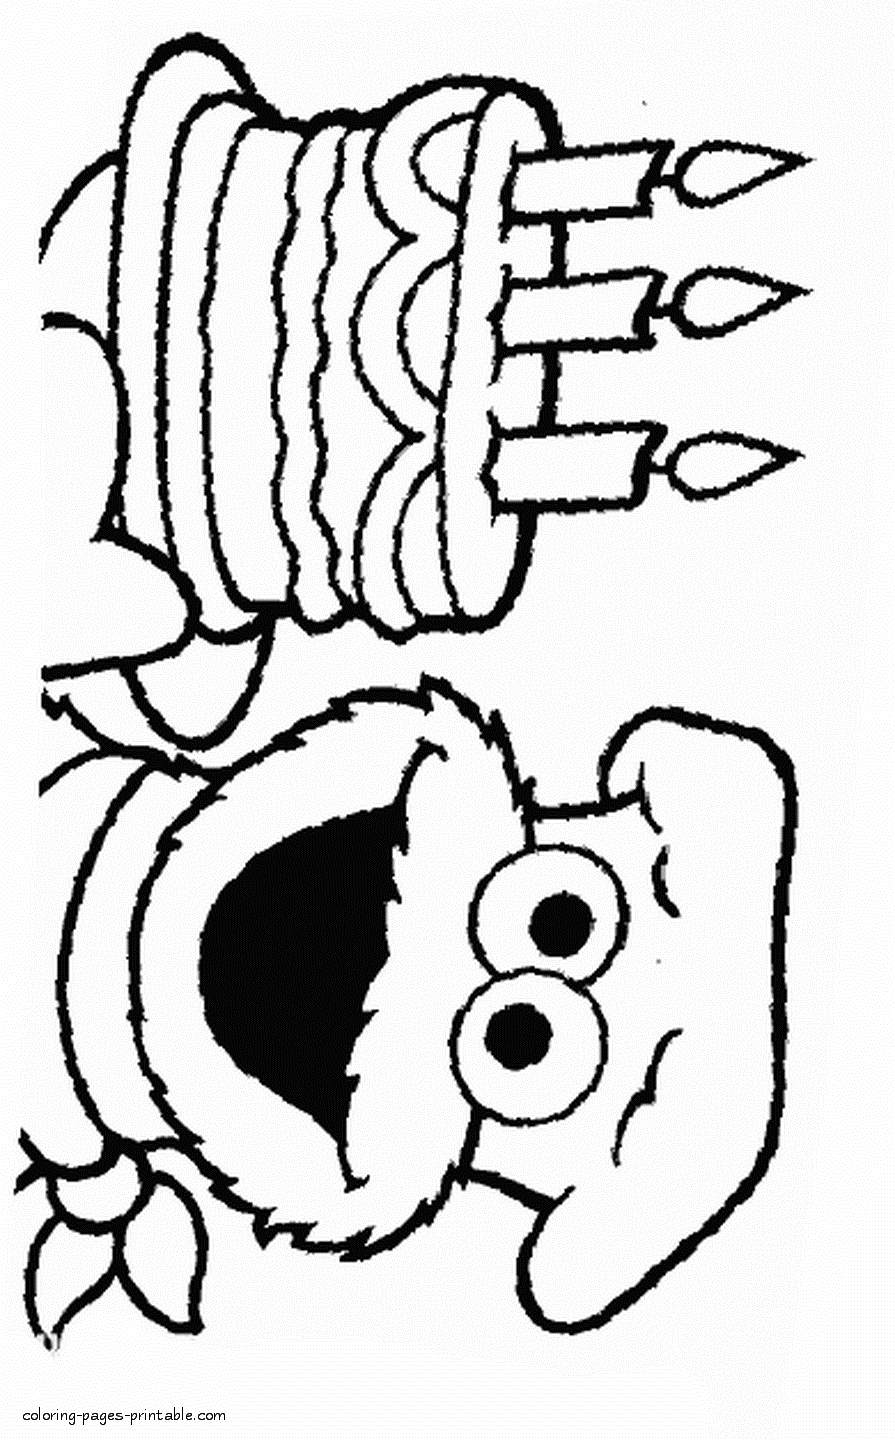 Sesame Street Cookie Monster coloring images